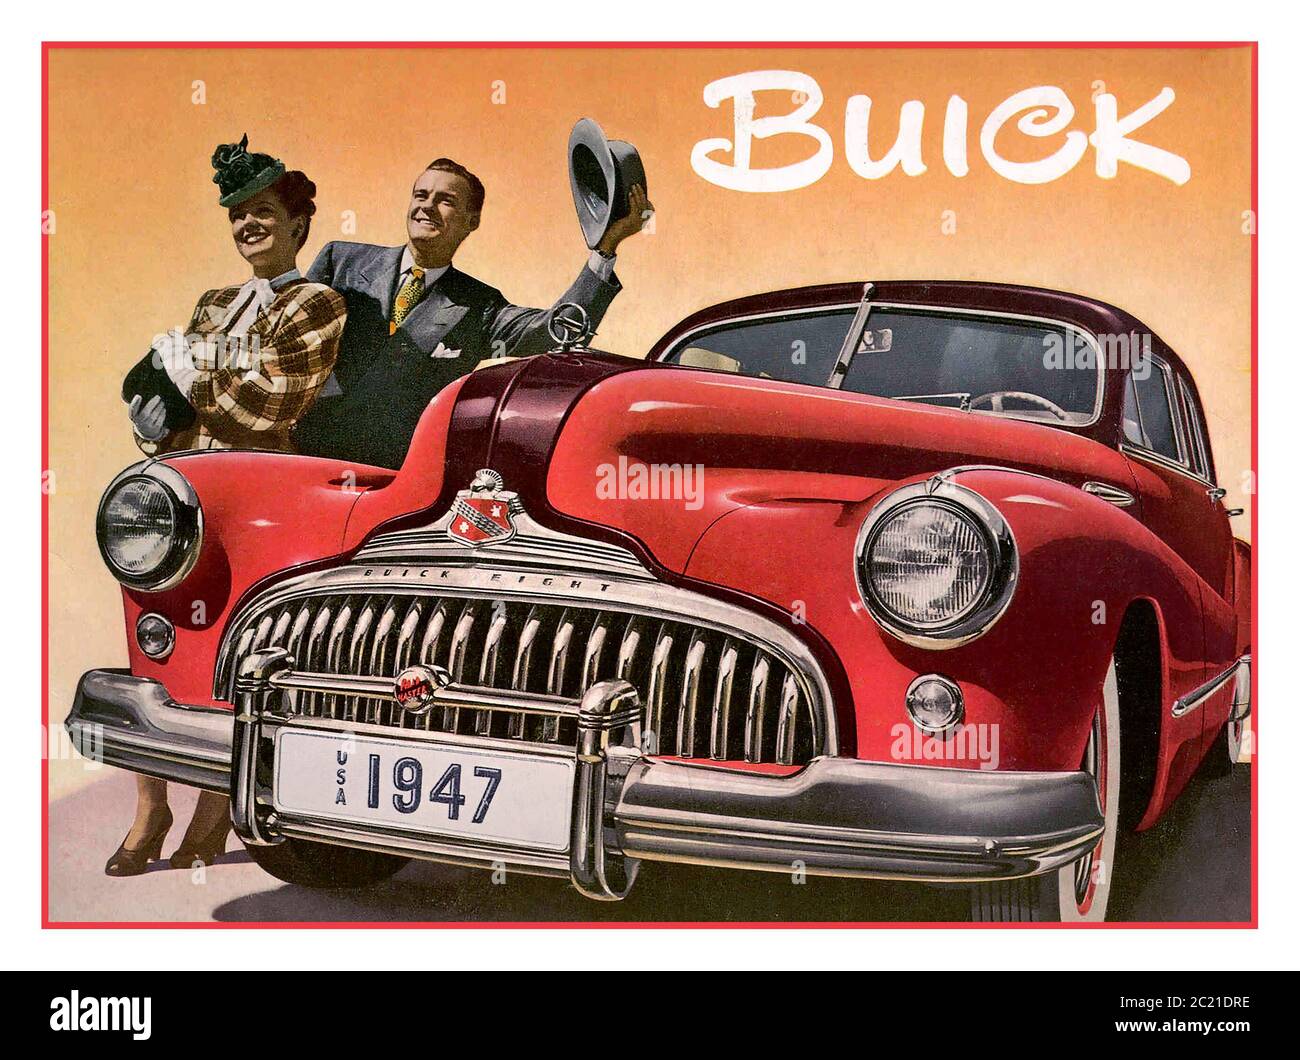 BUICK 1947 Vintage American Automobile Poster advertisement for Buick Super a full-sized automobile 248 cu in (4.1 L) 1947 Buick - Promotional Advertising Poster // Post World War II American Car Production flamboyant 1940's fashion style America USA Stock Photo